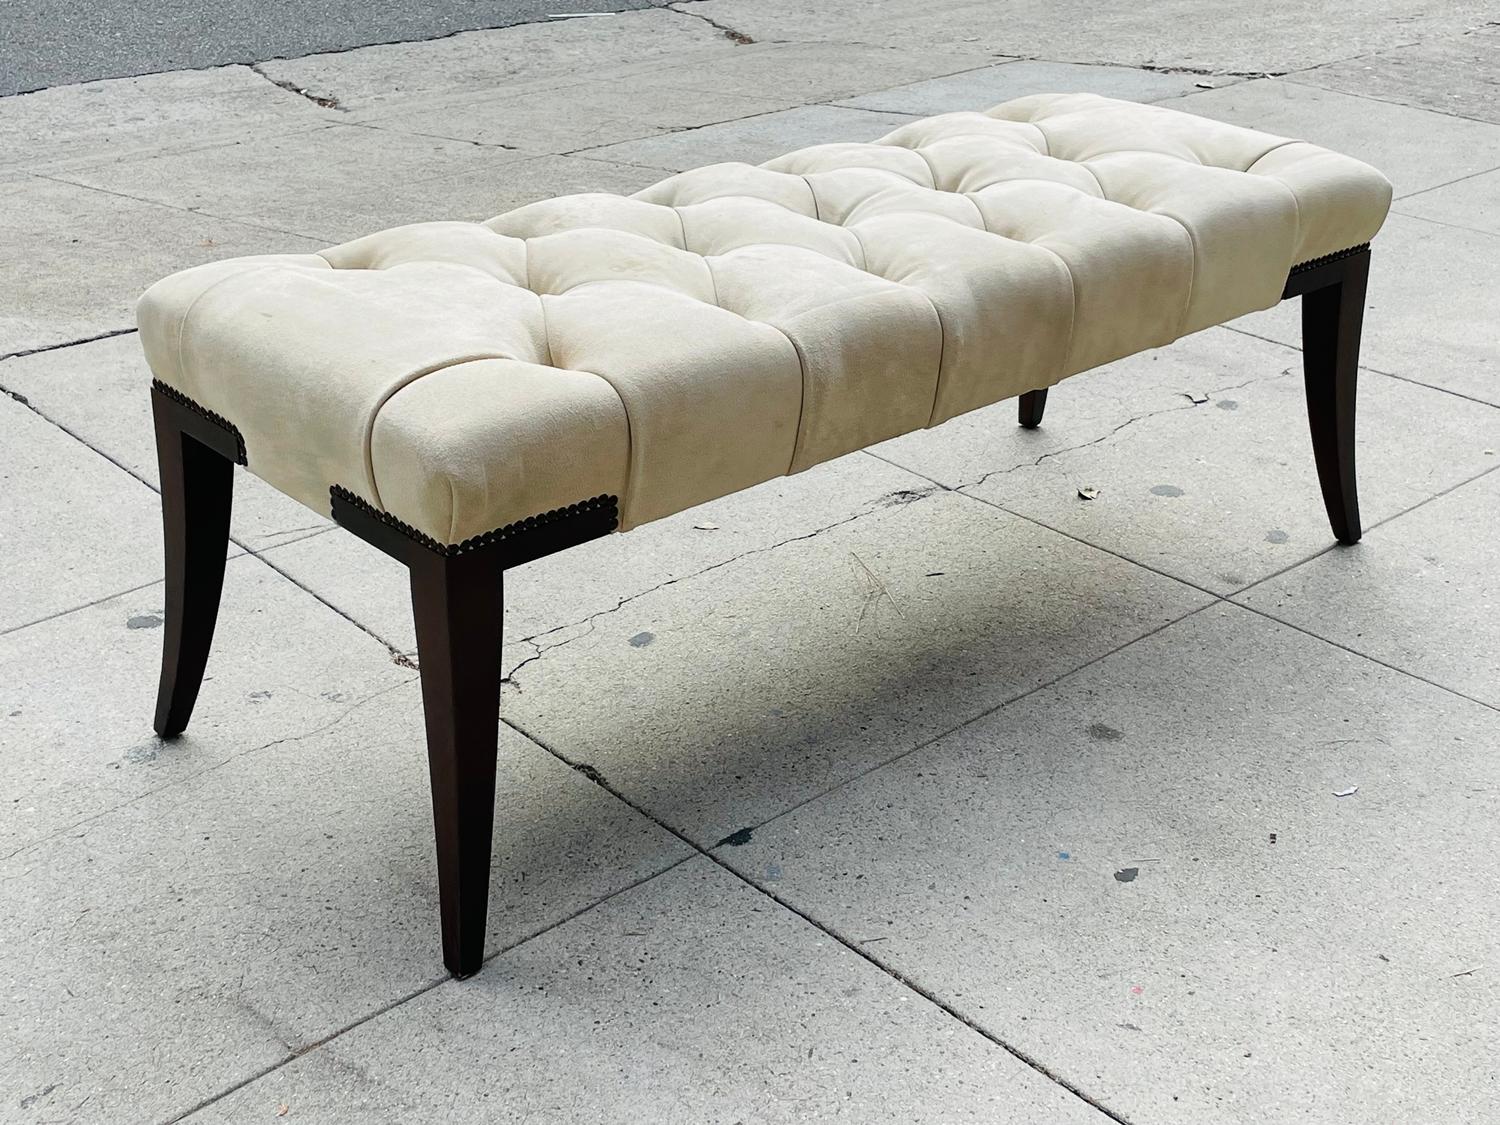 Beautiful bench designed by Thomas Pheasant and manufactured by Baker furniture, made in the USA.
The piece has beautiful lines, upholstered in an ivory color suede with nail head on the corners.
The legs are stain in a mahogany finish.

The